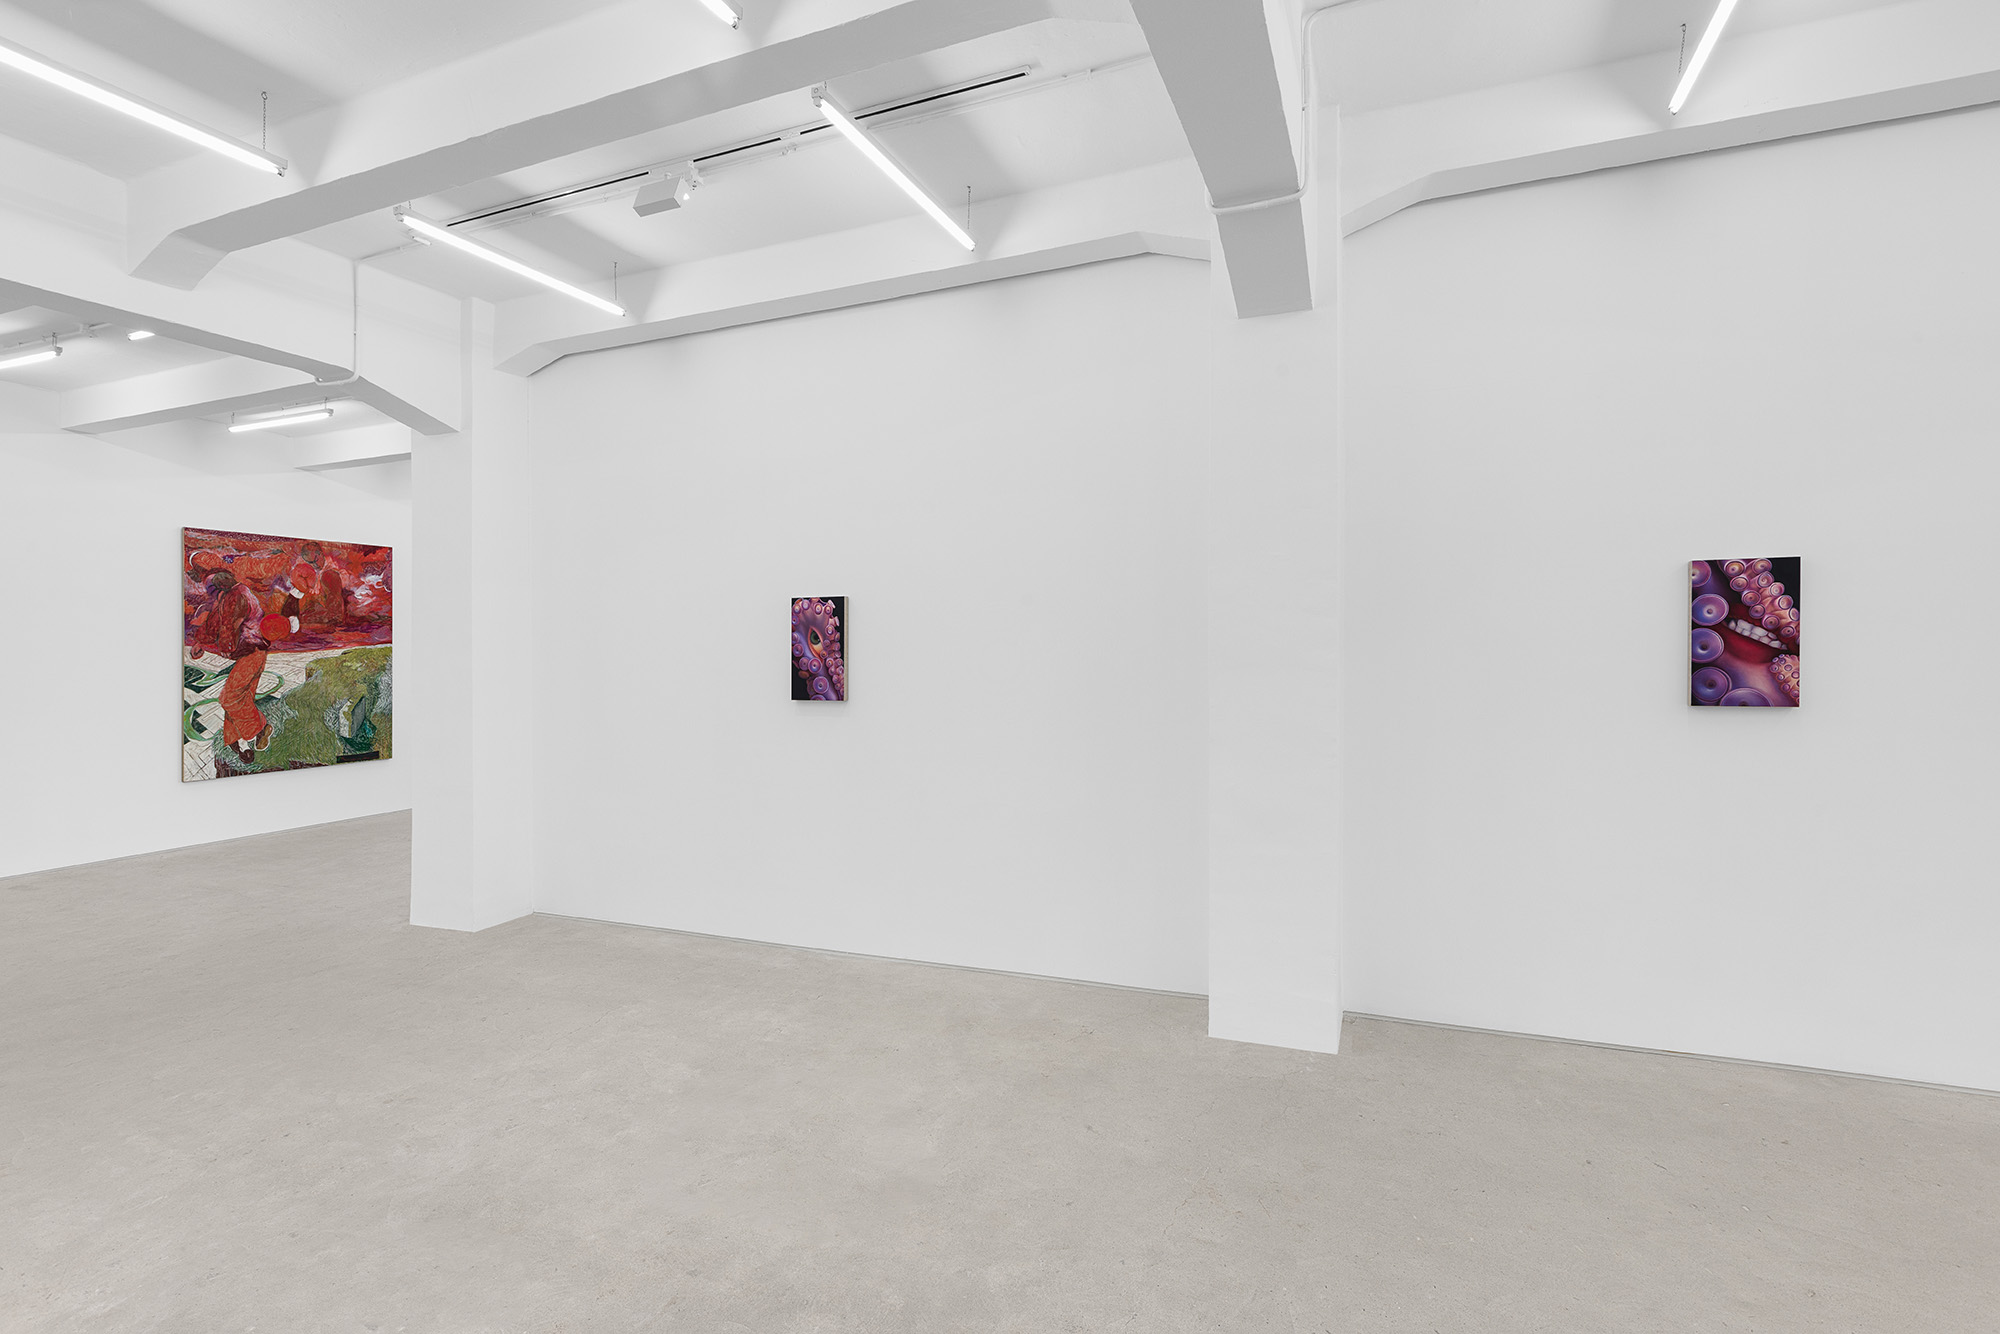 Installation view of group exhibition, Vacation II, at Gallery Vacancy, featuring works by Ariane Heloise Hughes and Henry Curchod.